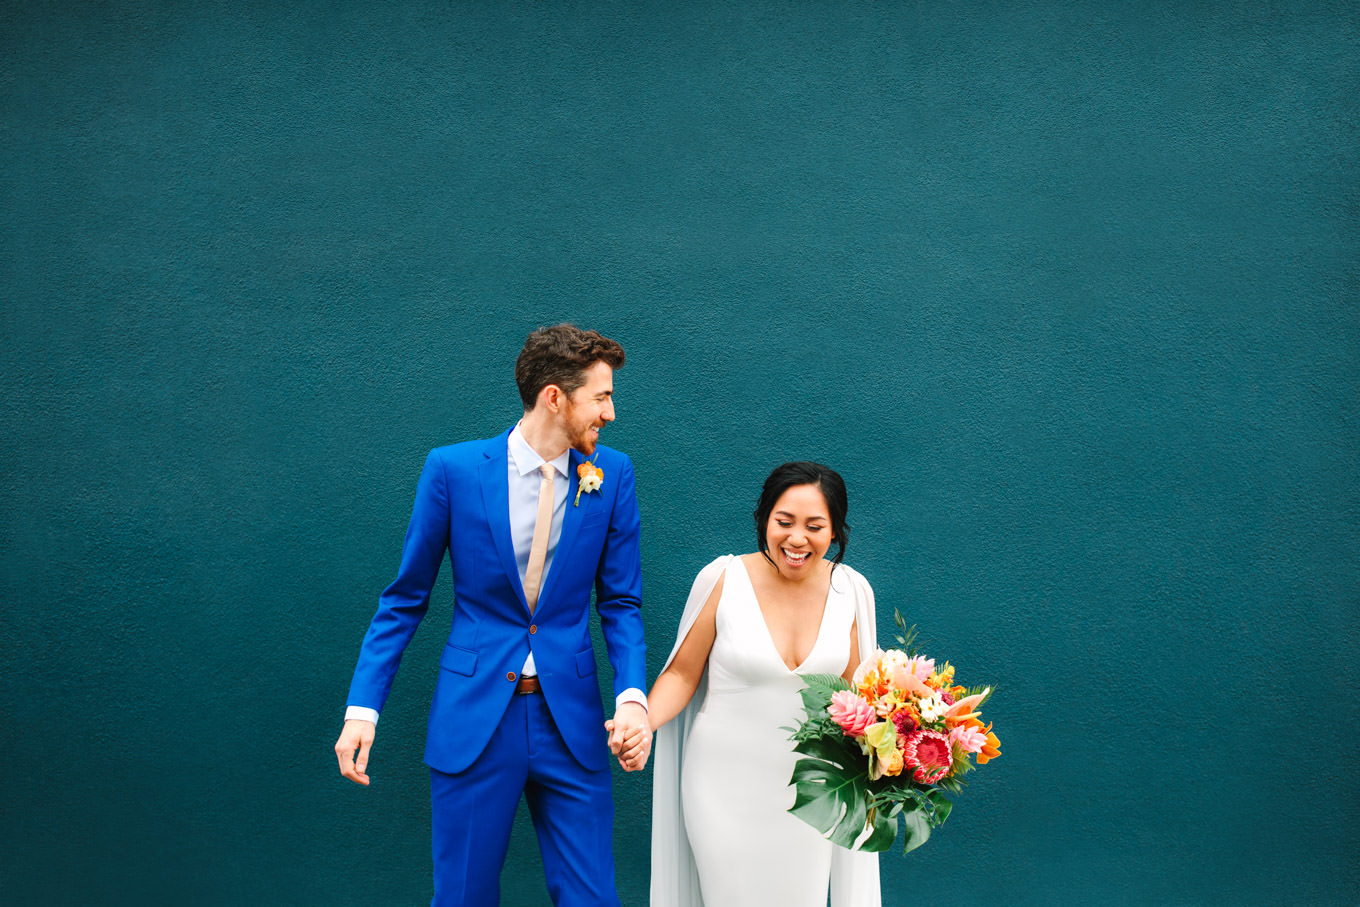 Bride and groom in bright blue suit laughing at The Fig House teal wall | Engagement, elopement, and wedding photography roundup of Mary Costa’s favorite images from 2020 | Colorful and elevated photography for fun-loving couples in Southern California | #2020wedding #elopement #weddingphoto #weddingphotography   Source: Mary Costa Photography | Los Angeles